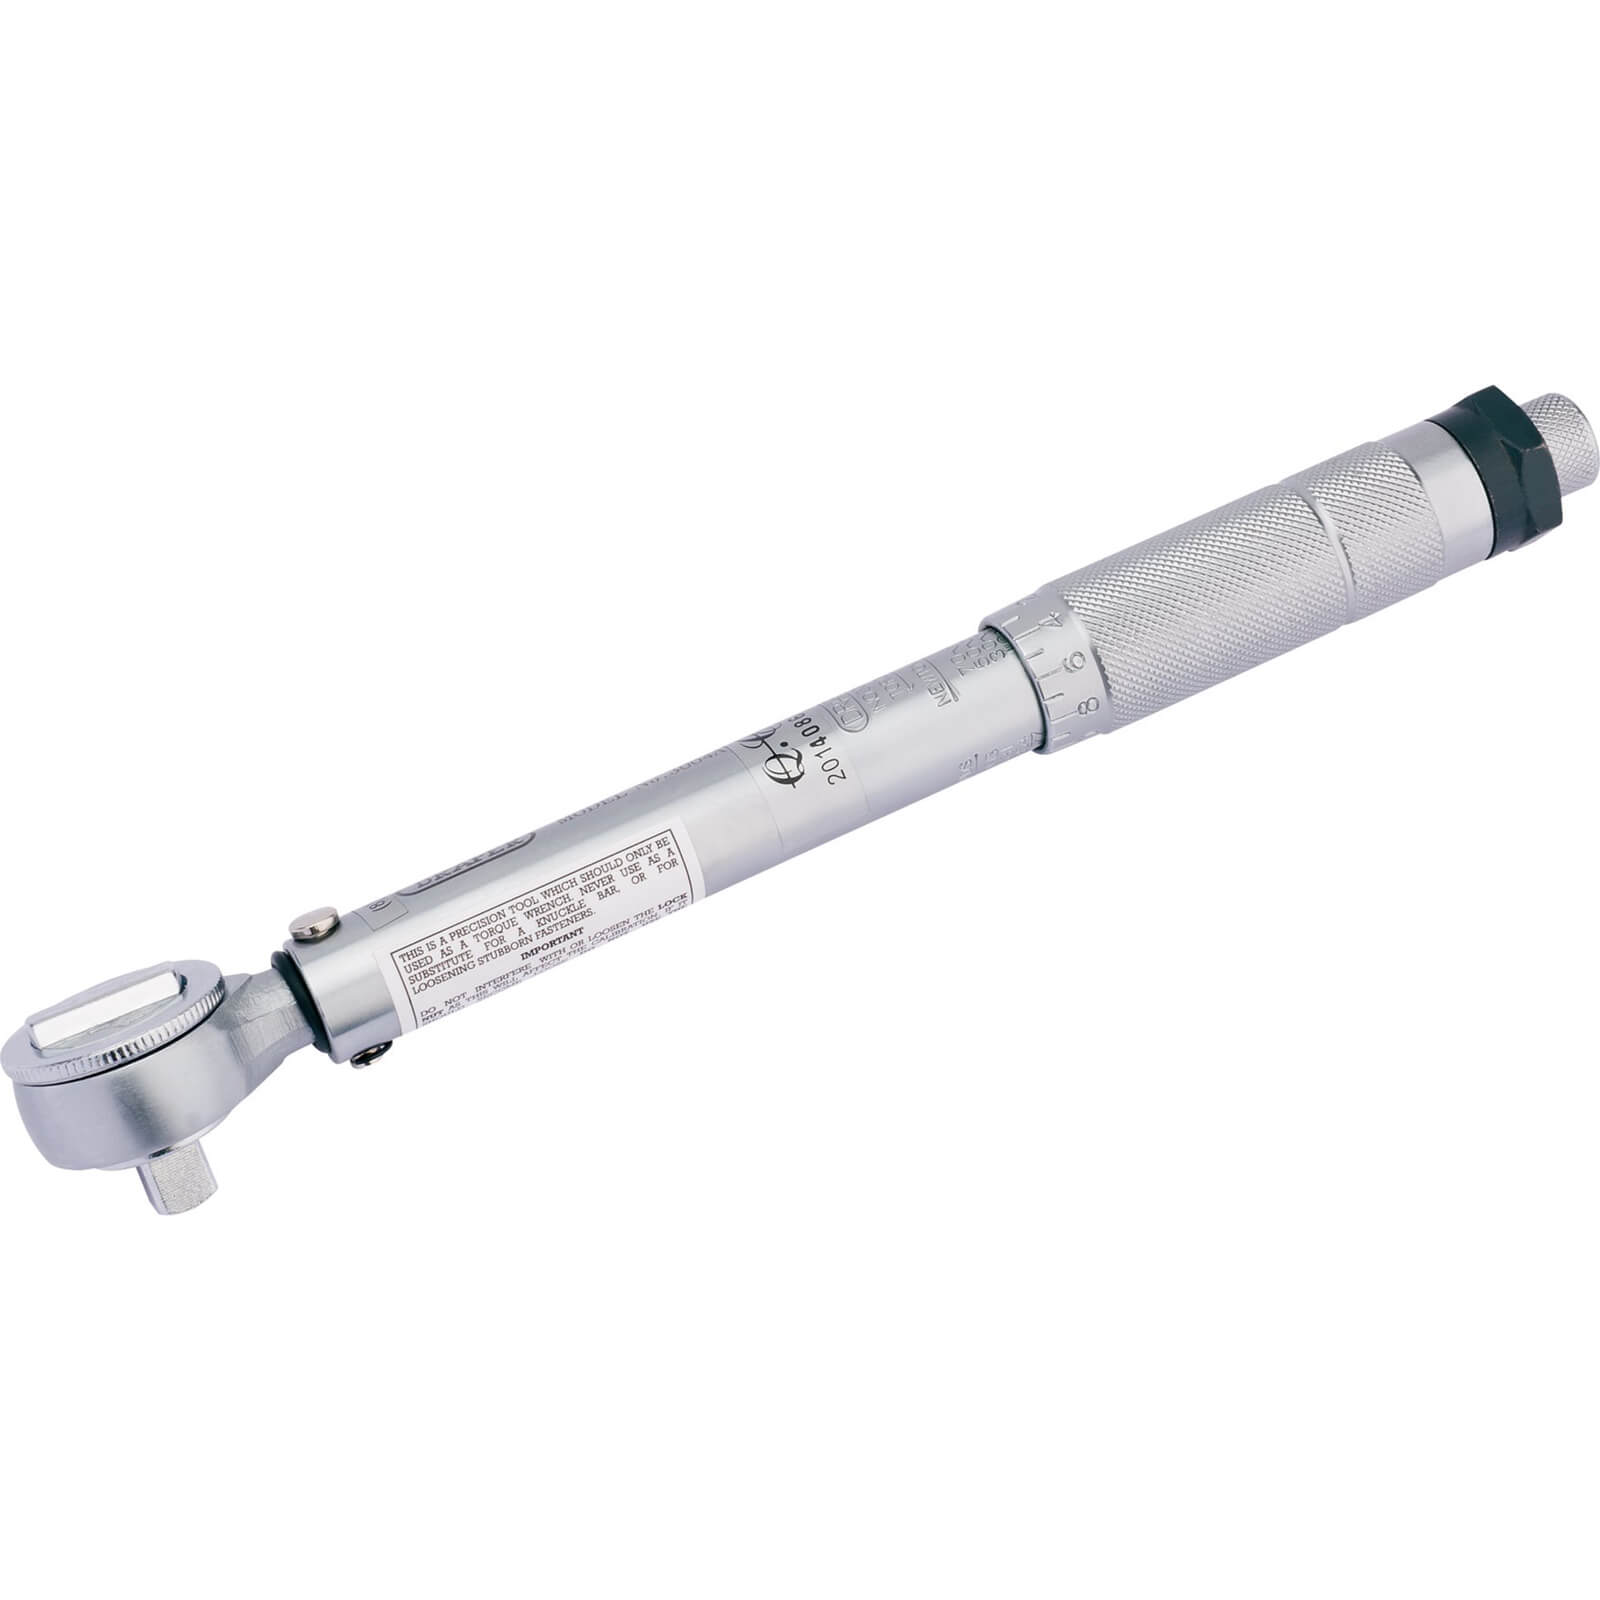 Image of Draper 3004A 3/8" Drive Torque Wrench 3/8" 10Nm - 80Nm